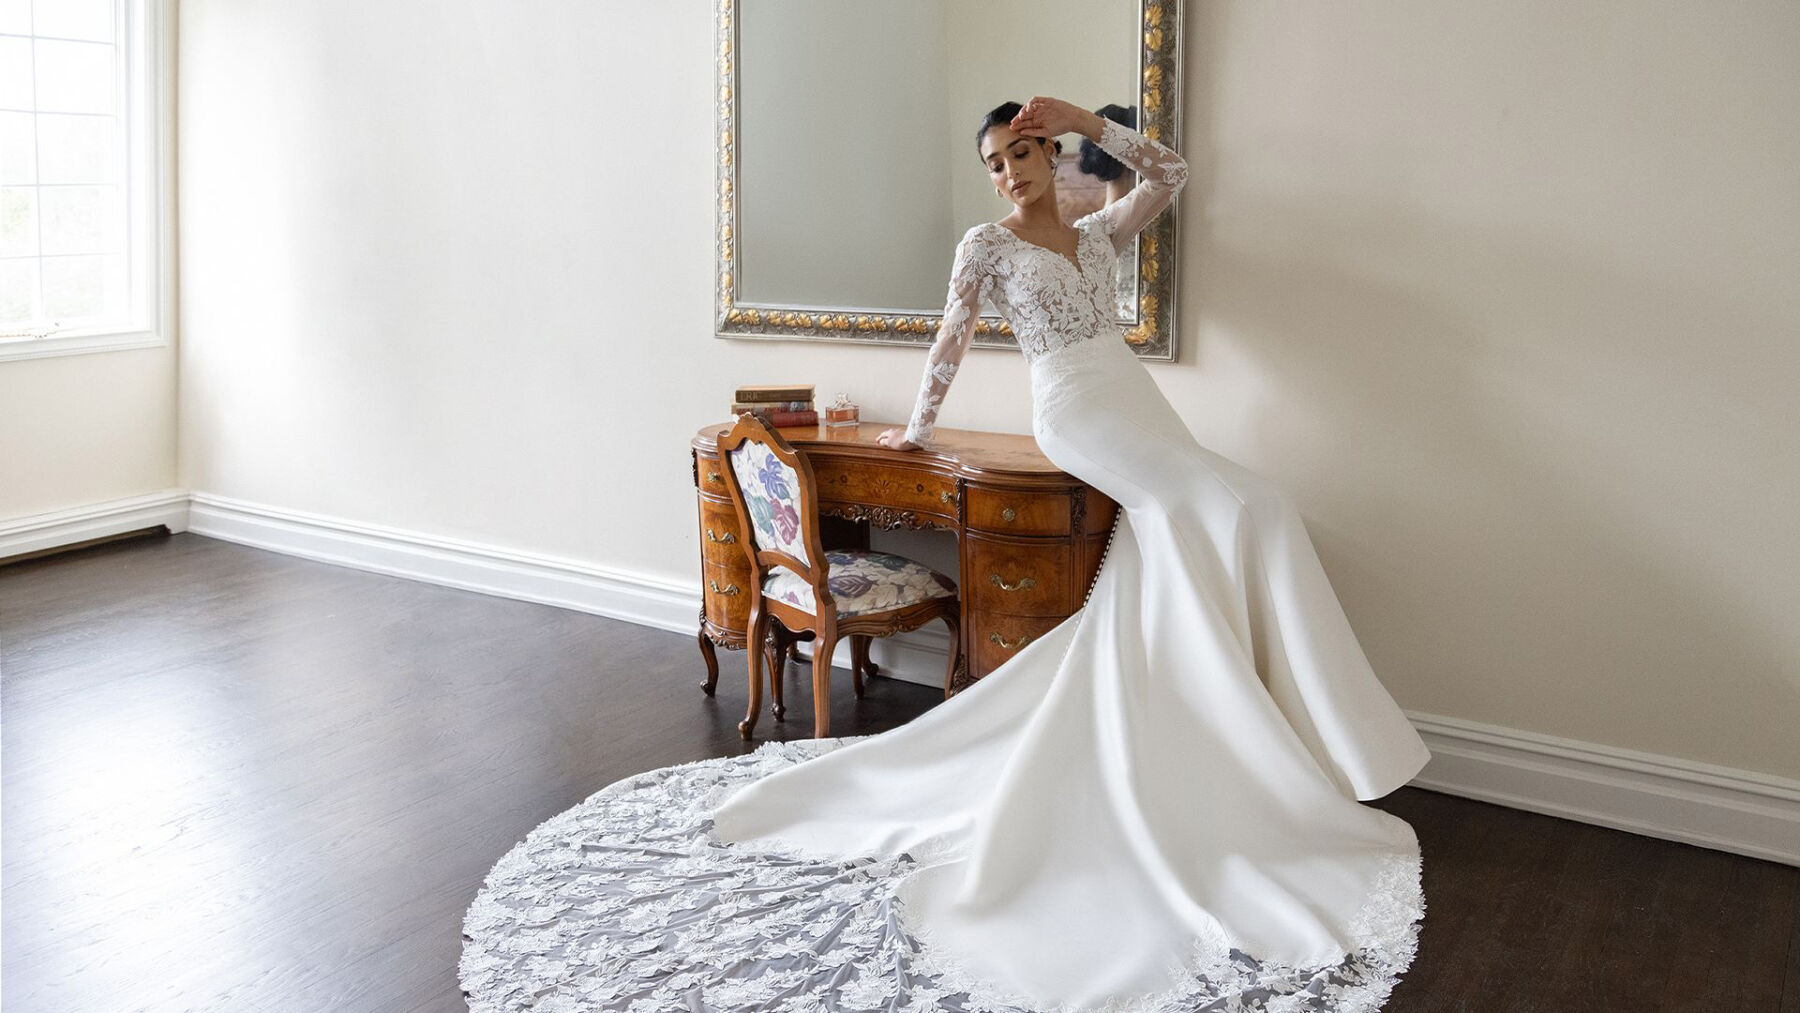 Justin Alexander wedding dress with sweeping train